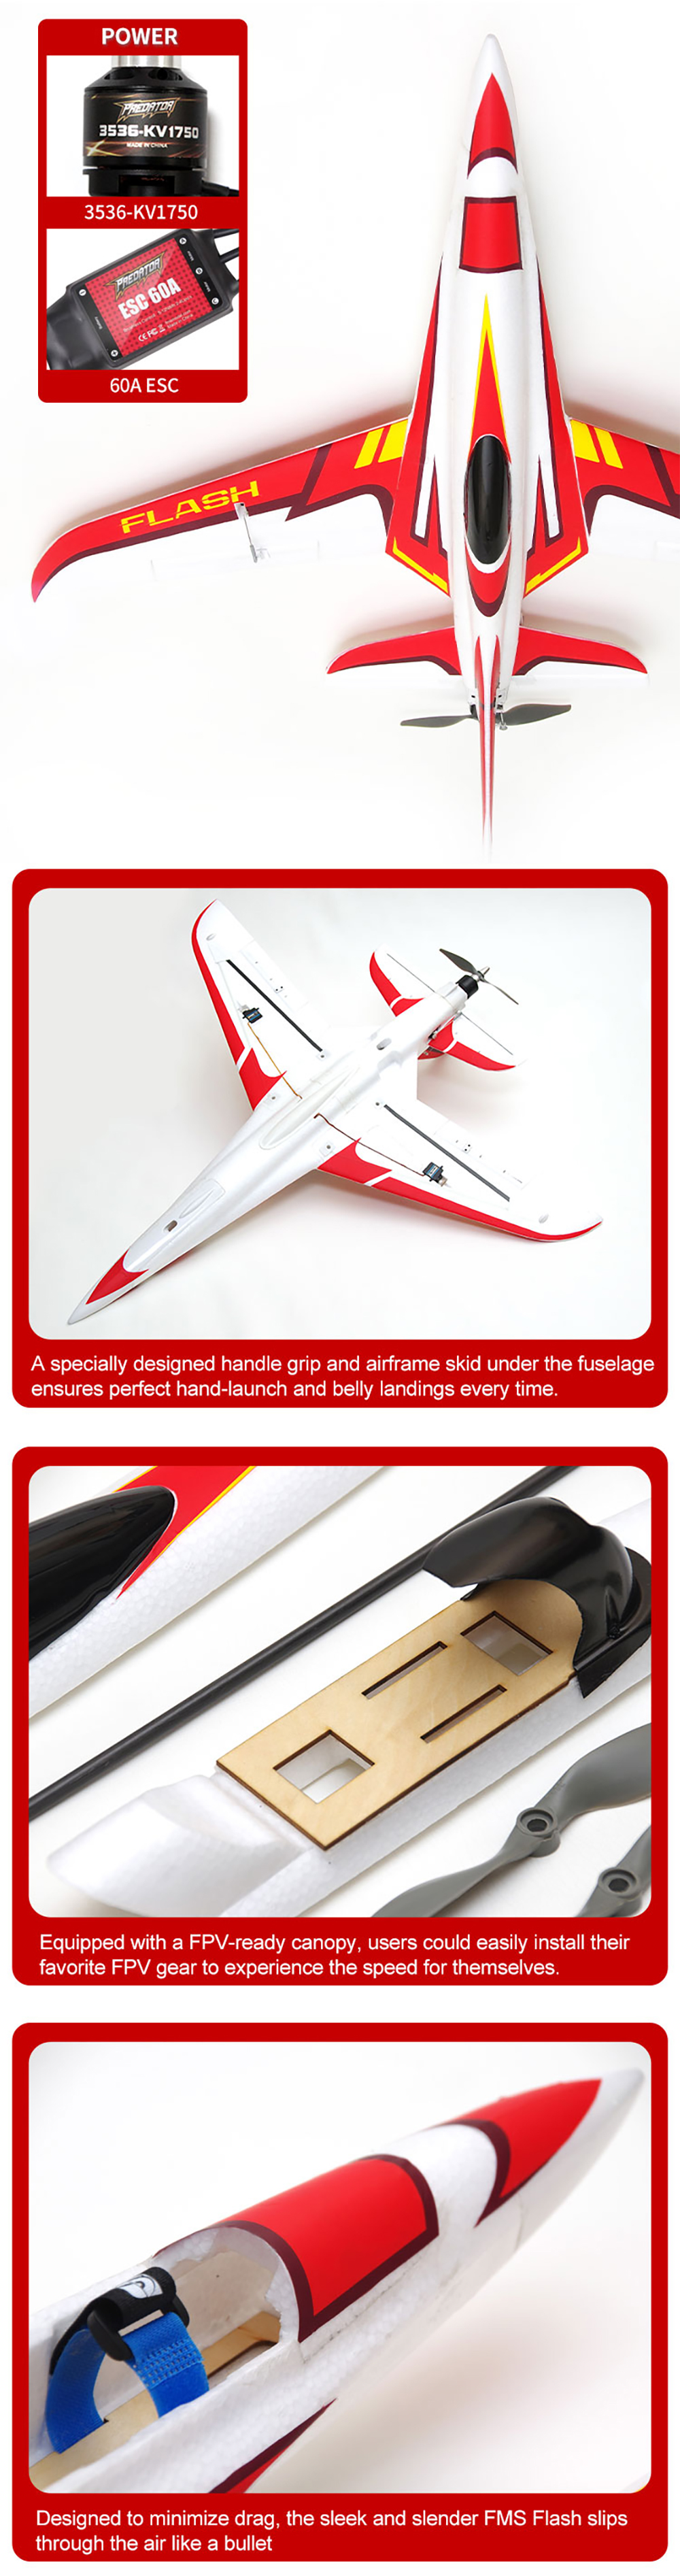 FMS-850mm-Wingspan-Flash-High-Speed-180kmh-4S-Racer-EPO-RC-Airplane-PNP-with-Reflex-Stabilizer-Fligh-1774714-2